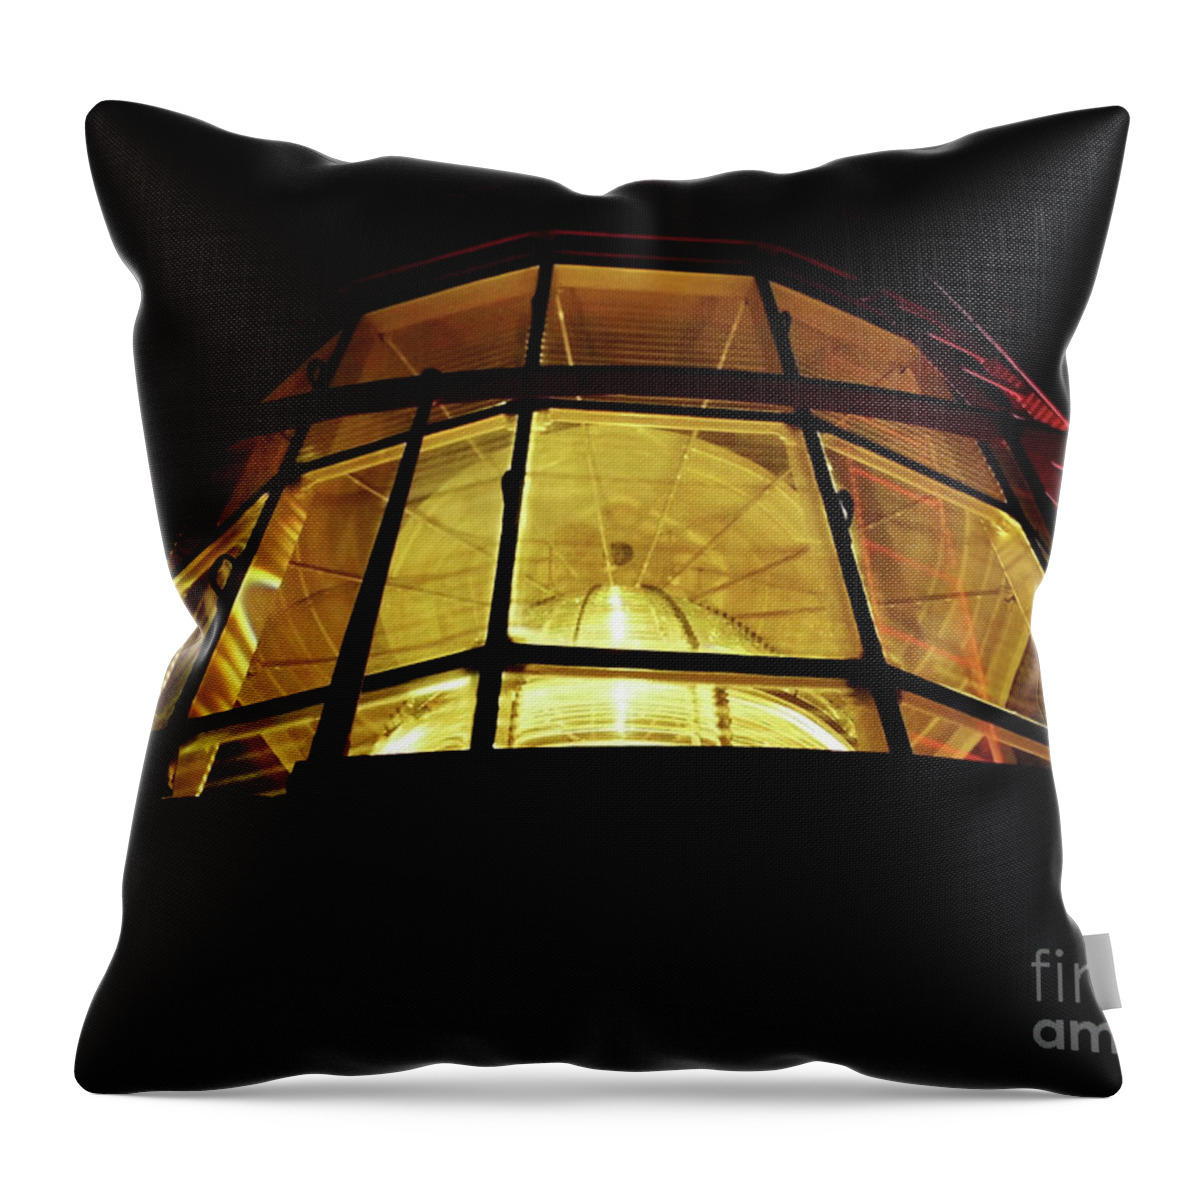 Lighthouse Throw Pillow featuring the photograph Light In The Dark Sky by D Hackett